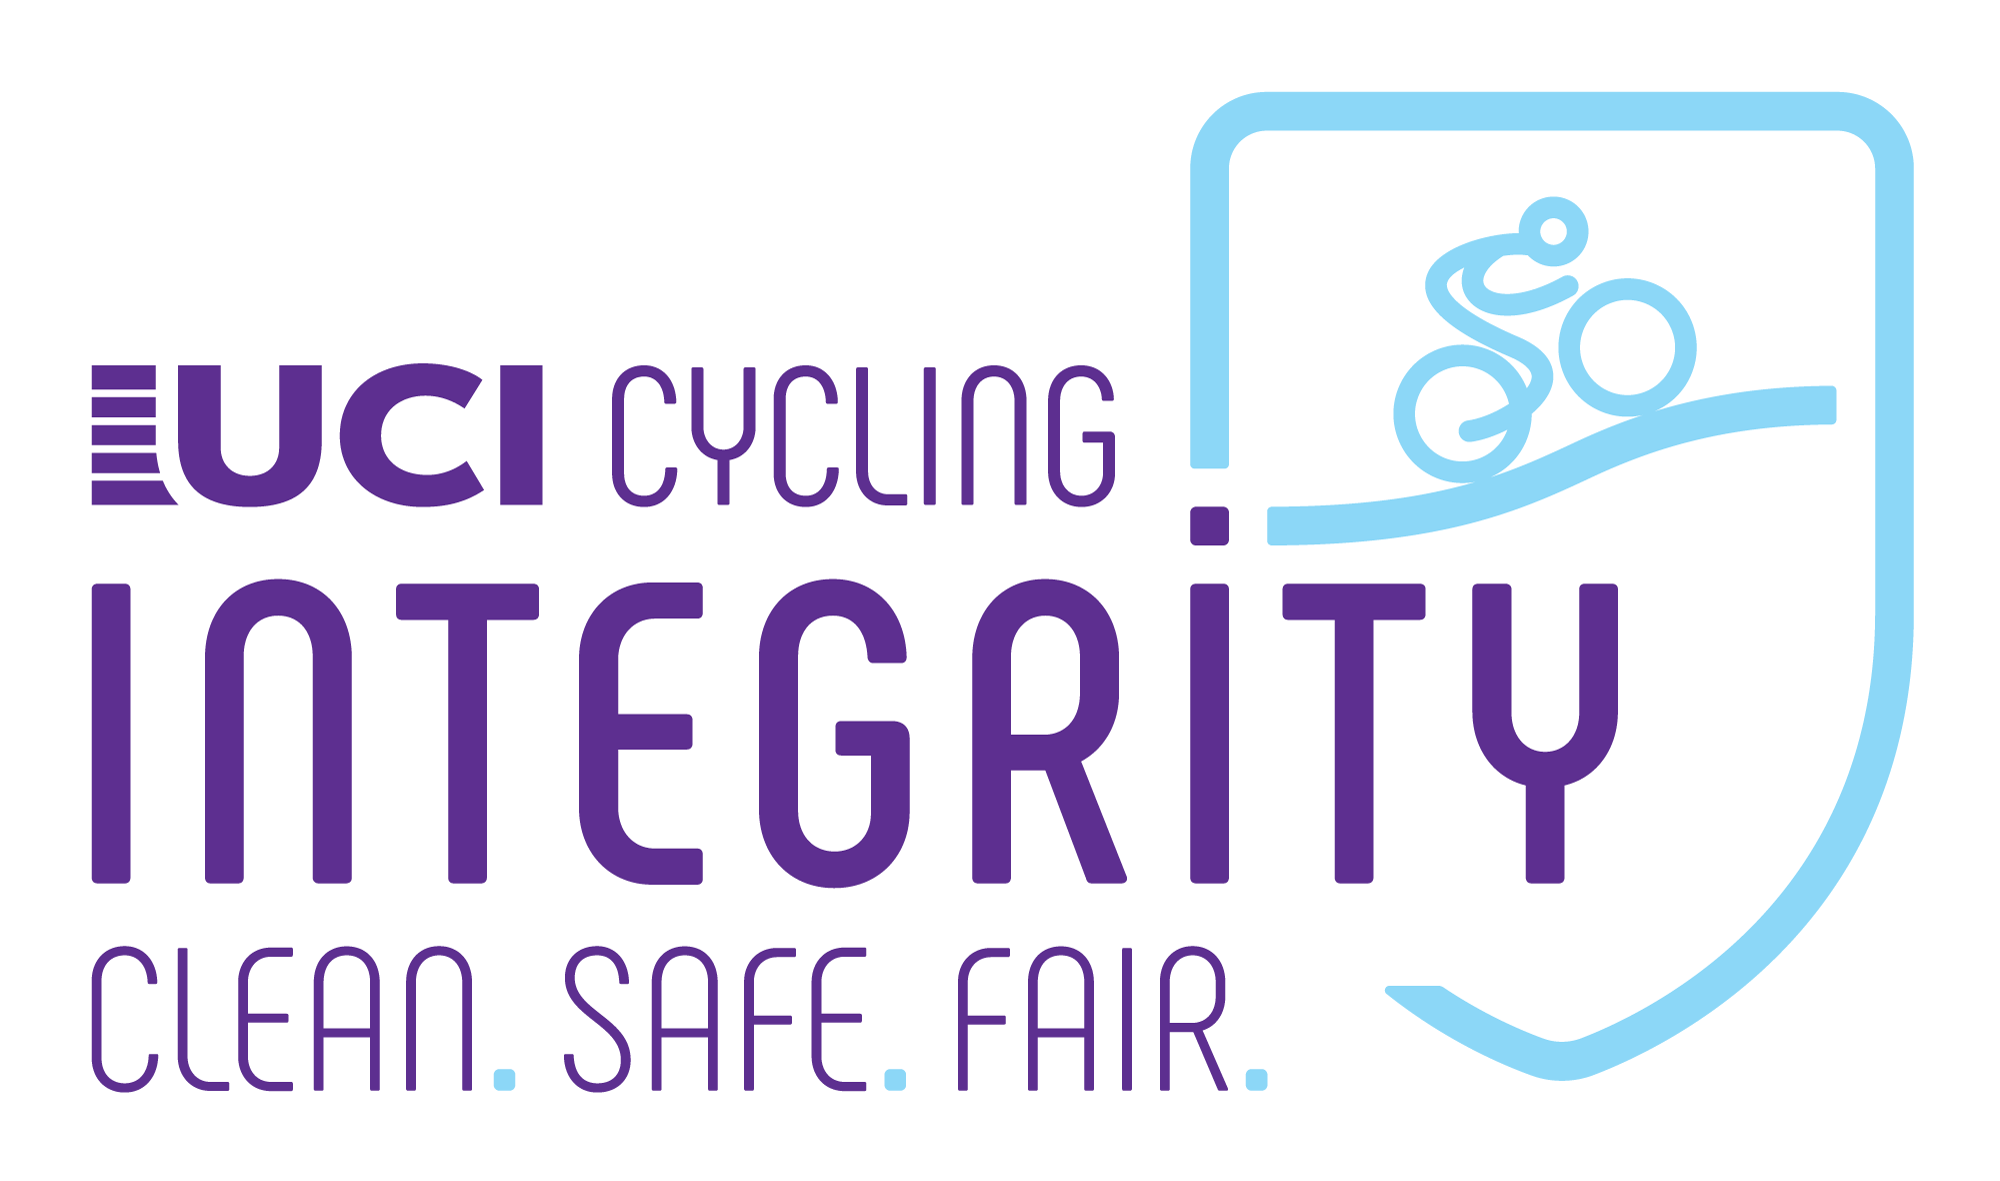 UCI launches Cycling Integrity brand